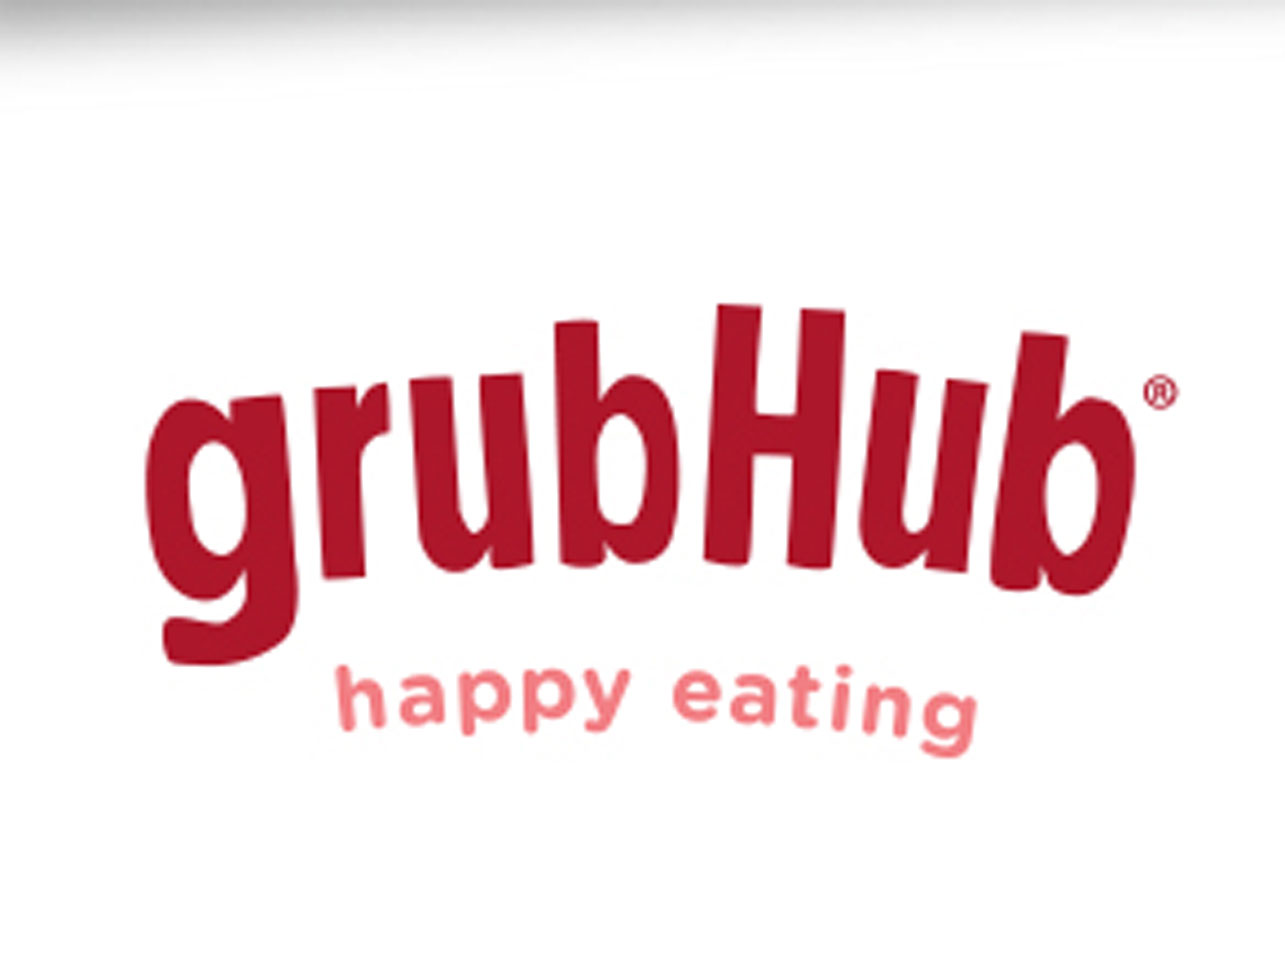 Online-ordering company Grubhub files for IPO with $1billion valuation ...